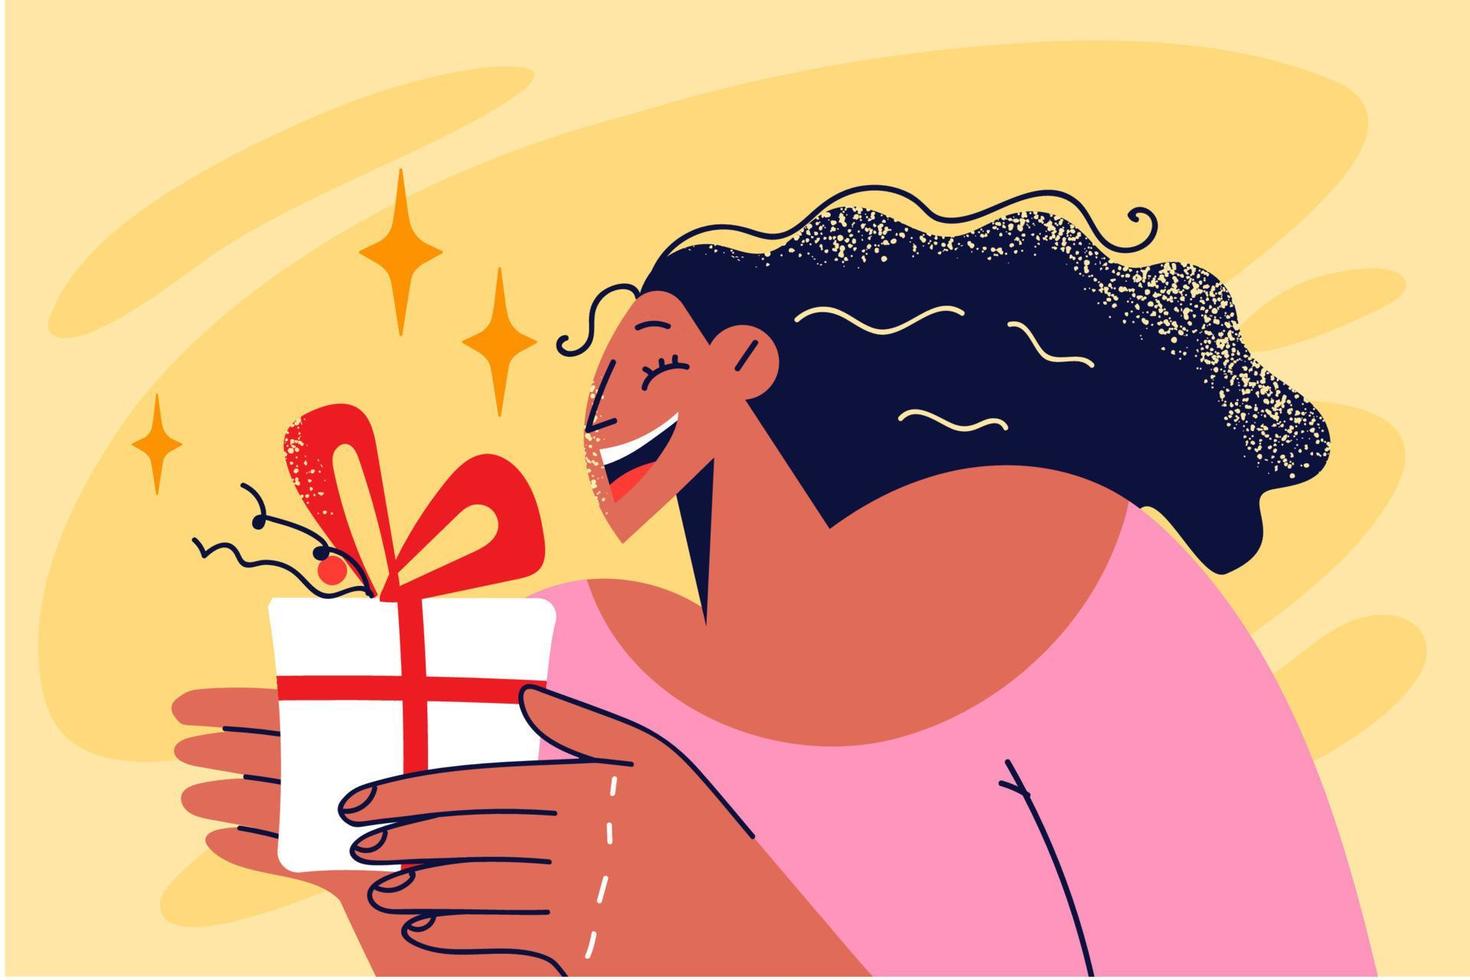 Smiling woman holding wrapped gift in hands celebrate birthday or anniversary. Happy girl with giftbox excited with present or surprise. Vector illustration.